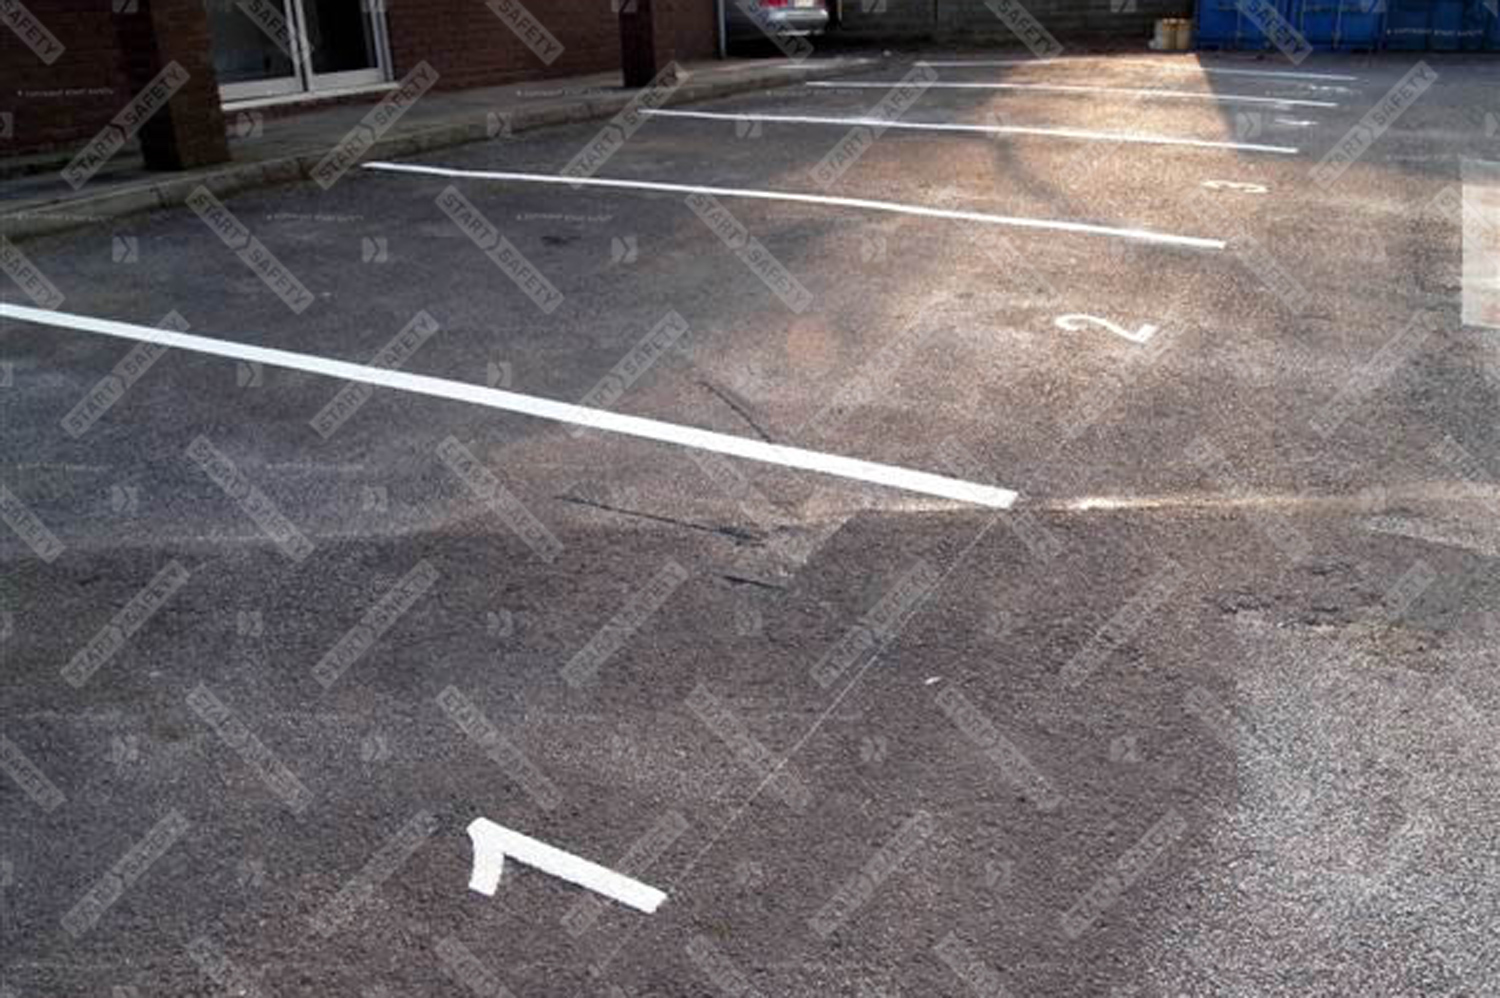 Thermoplastic Used to Mark Parking Bays